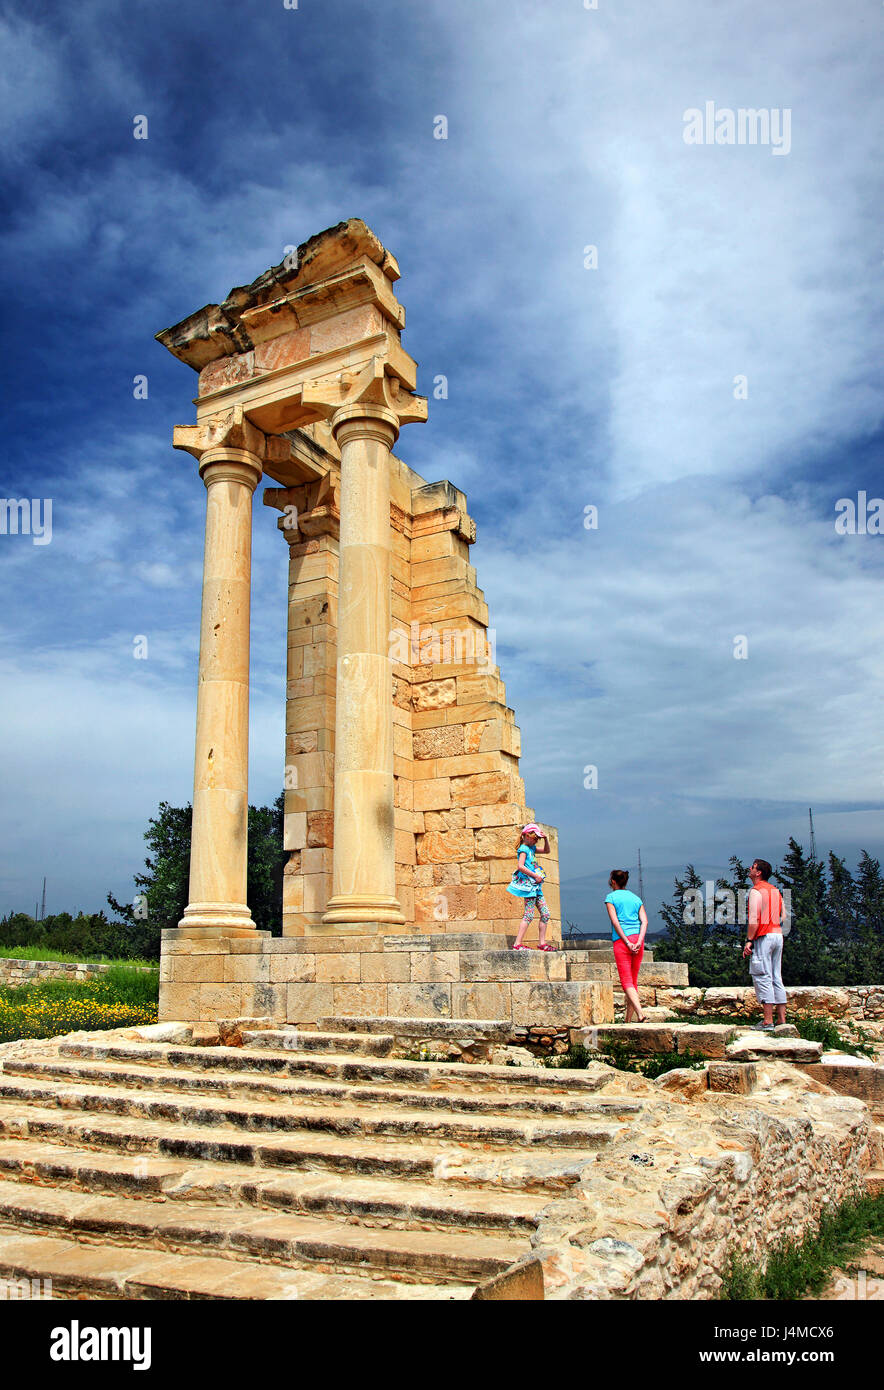 The temple in the Sanctuary of Apollo Hylates close to Ancient Kourion, district of Lemessos (Limassol), Cyprus. Stock Photo